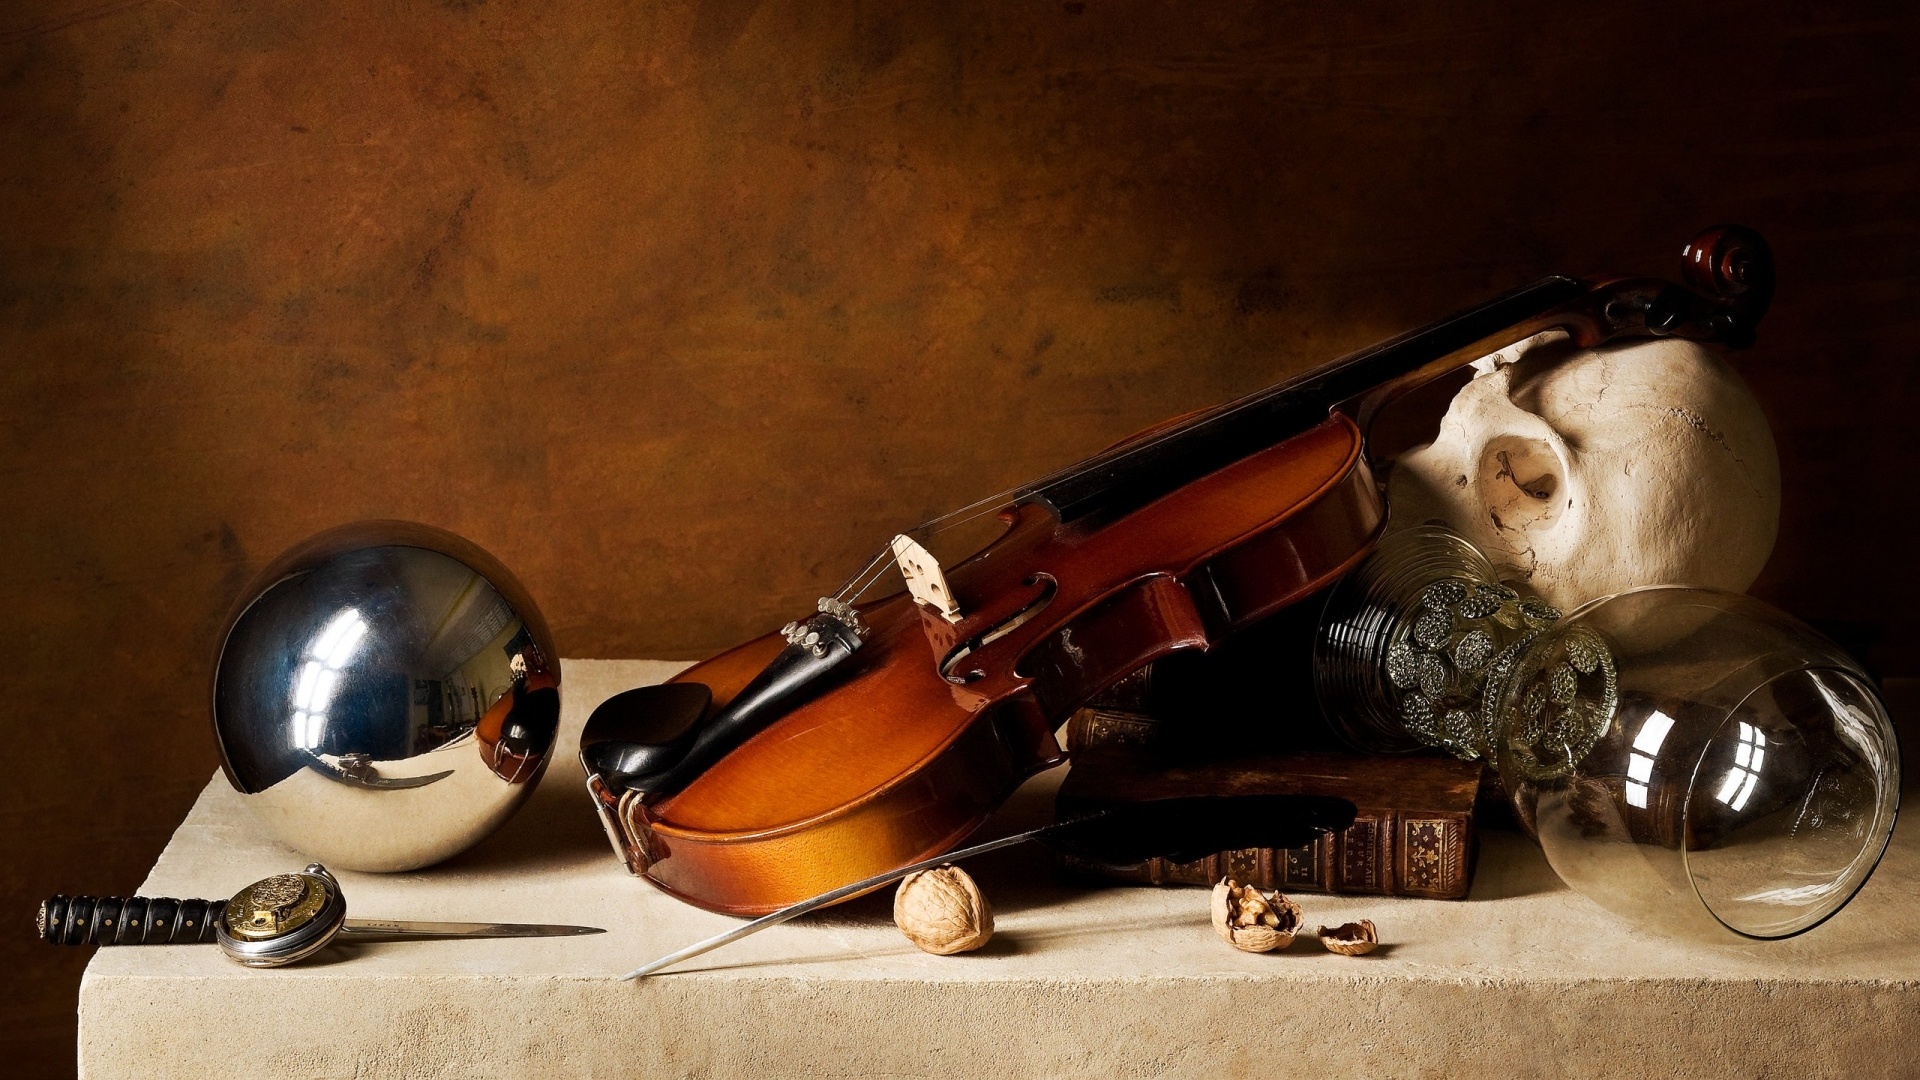 Violin: Musical Instruments In Modern Art, Painting In The Dutch Style Of 17th Century. 1920x1080 Full HD Wallpaper.